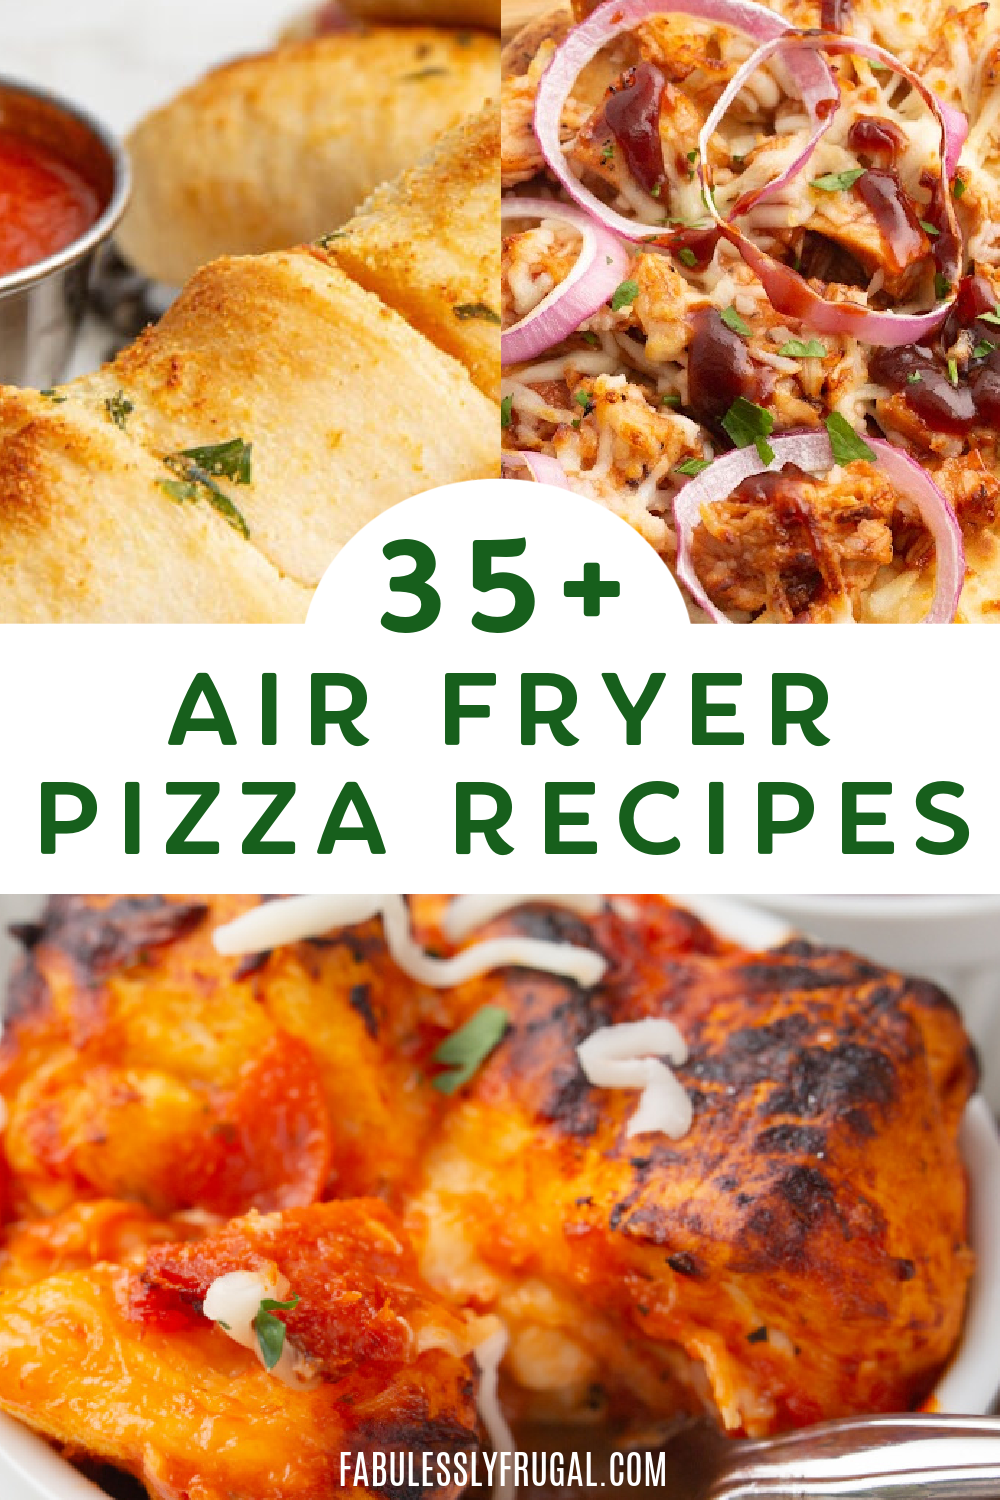 Air Fried Bubble Pizza Recipe - Fabulessly Frugal